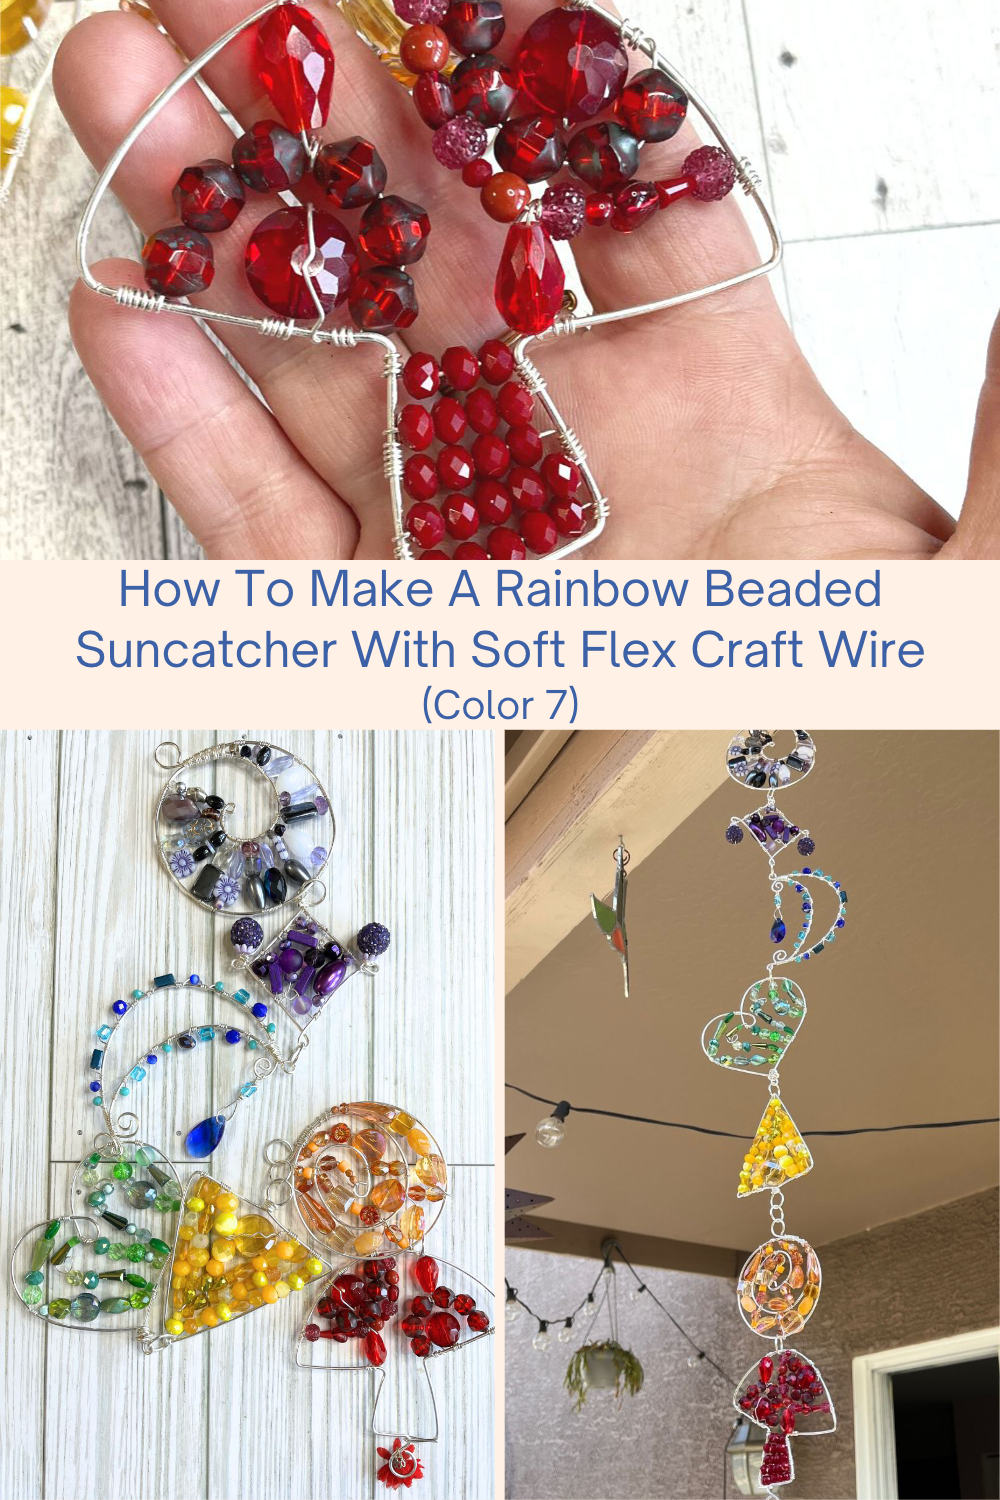 How To Make A Rainbow Beaded Suncatcher With Soft Flex Craft Wire (Color 7) Collage